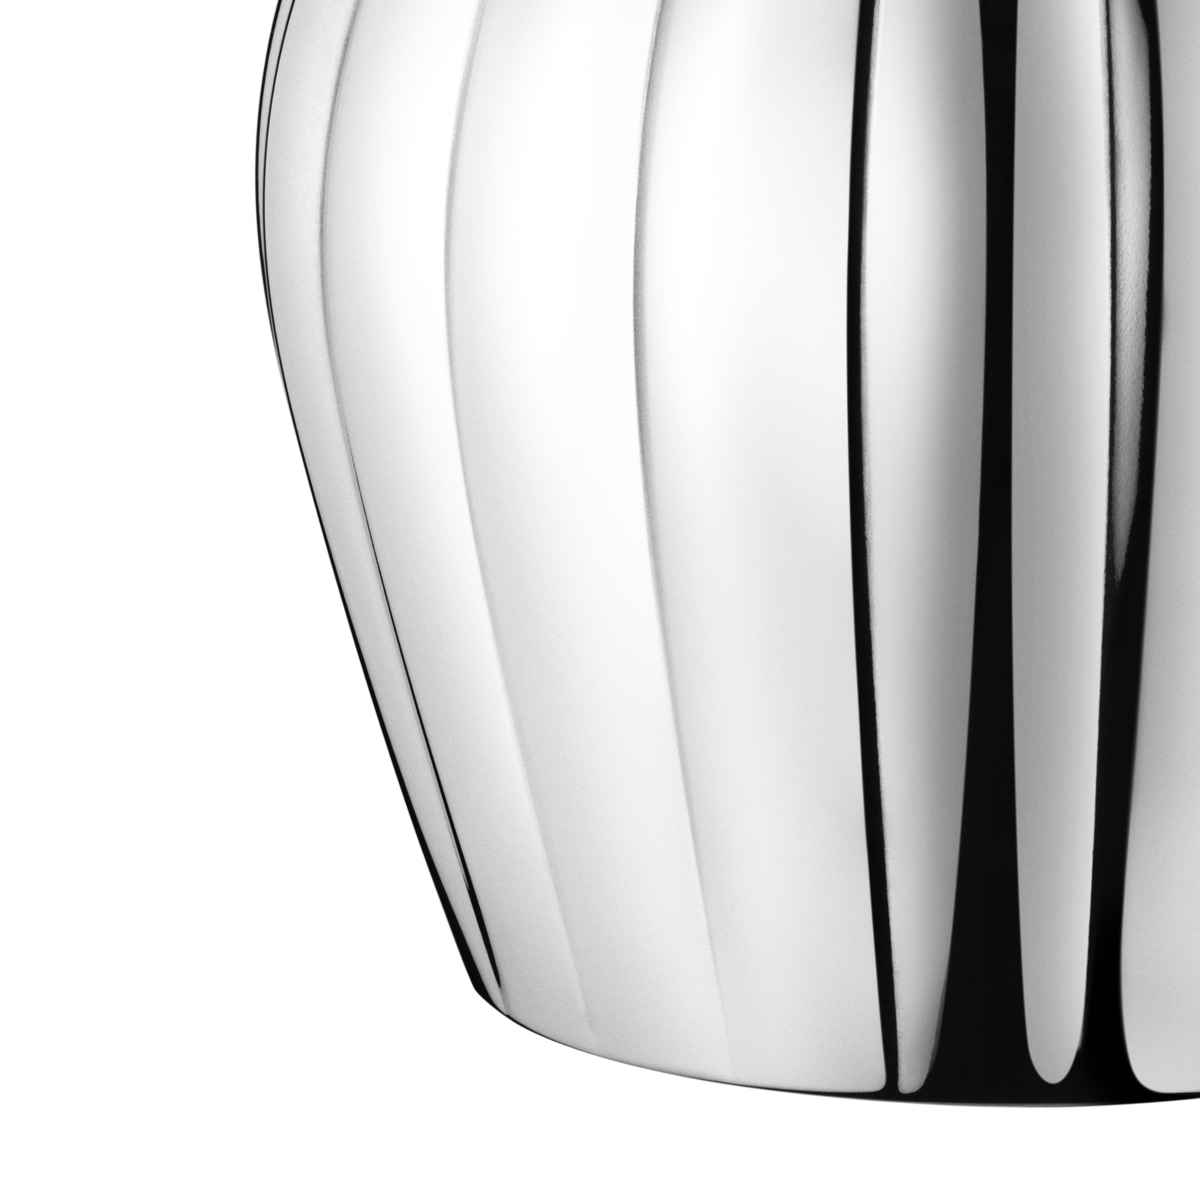 https://res.cloudinary.com/georgjensen/image/upload/f_auto,dpr_2/w_auto,c_scale/products/images/hi-res/3583606-Bernadotte-Thermo-0_8L-detail-3?_i=AG